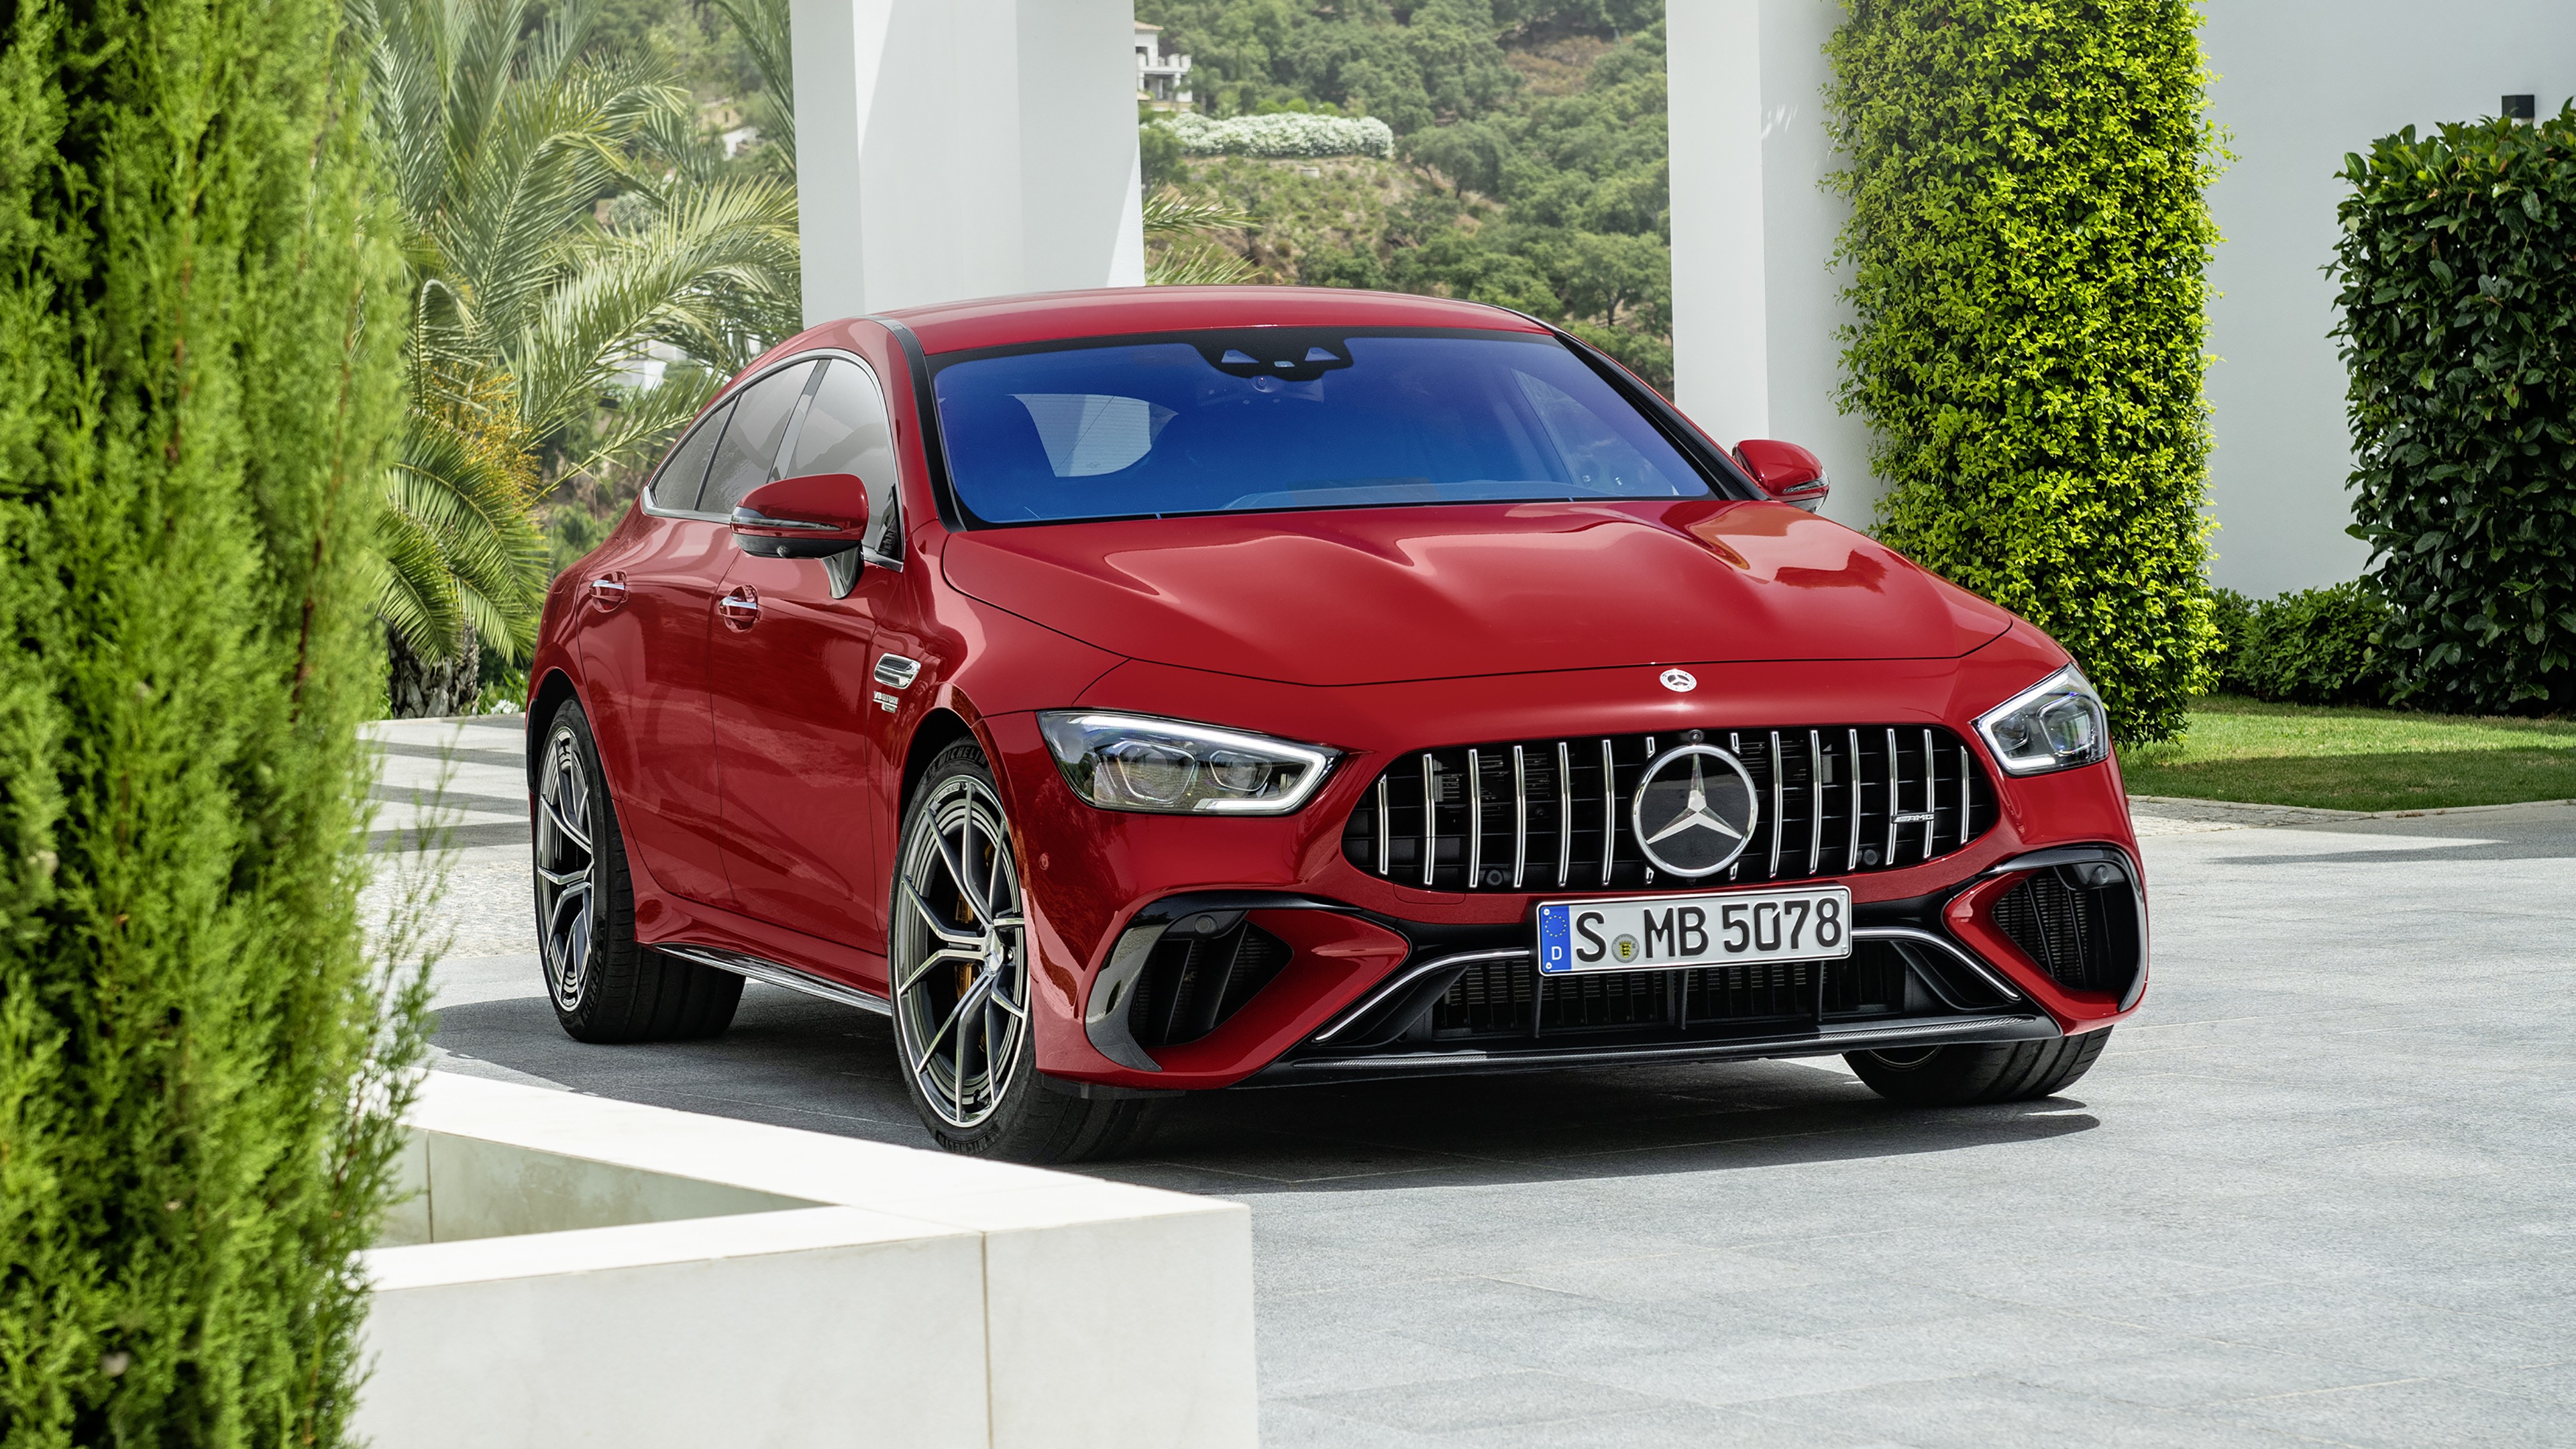 Mercedes AMG GT 63 S E Performance 4 Door Coupe 2021 4K HD Cars Wallpapers